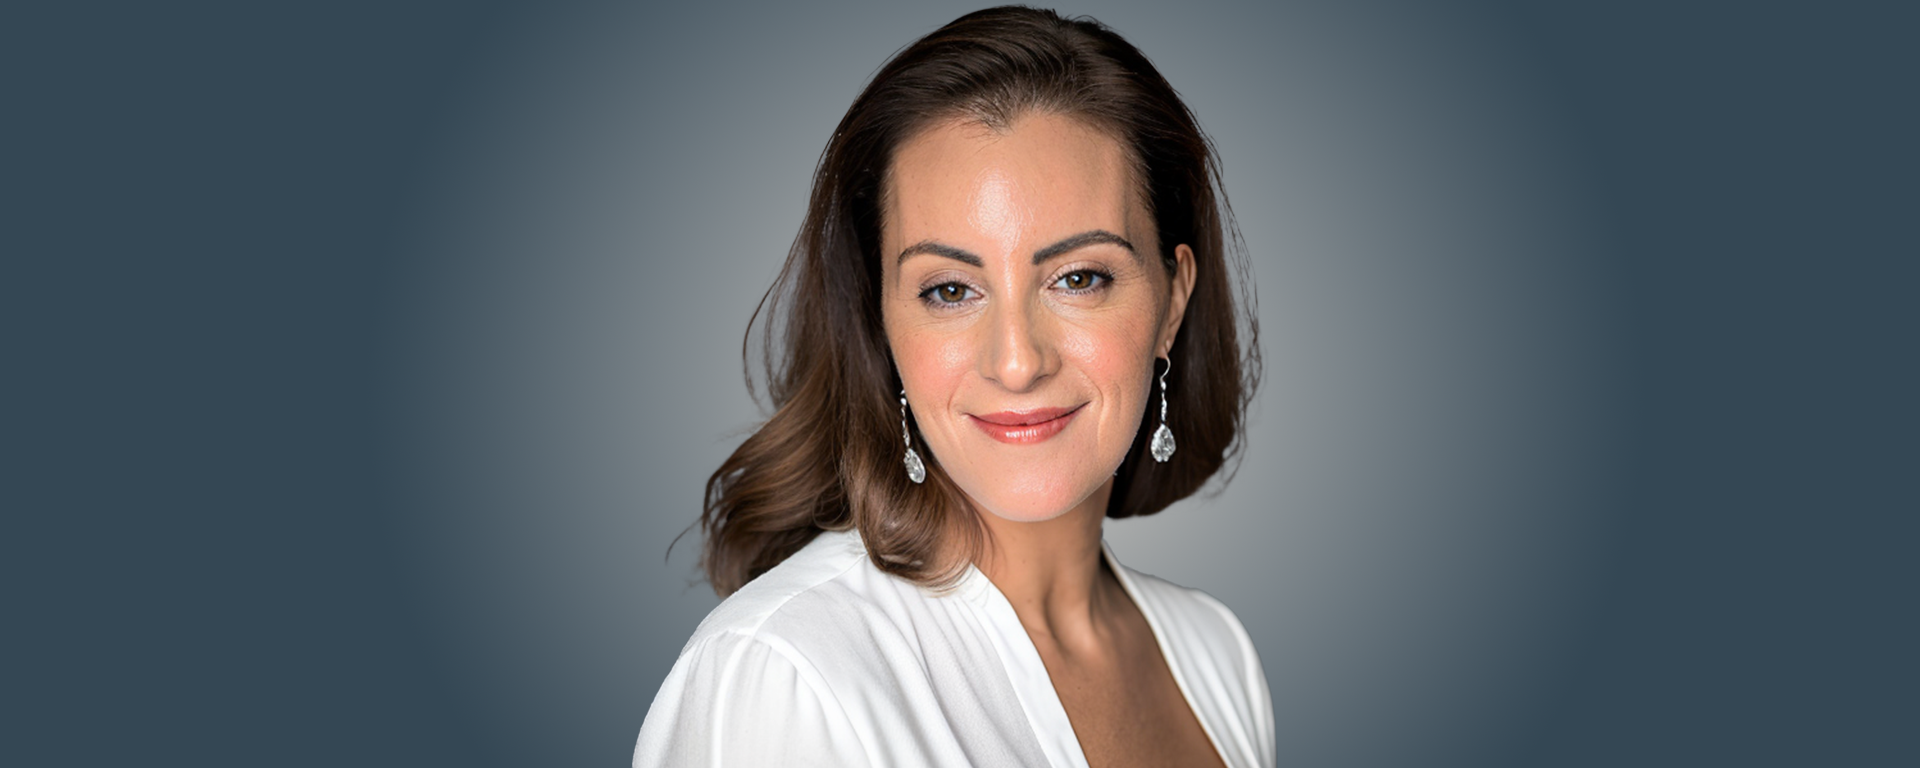 South Pole appoints Nadia Kaddouri as Chief Financial Officer